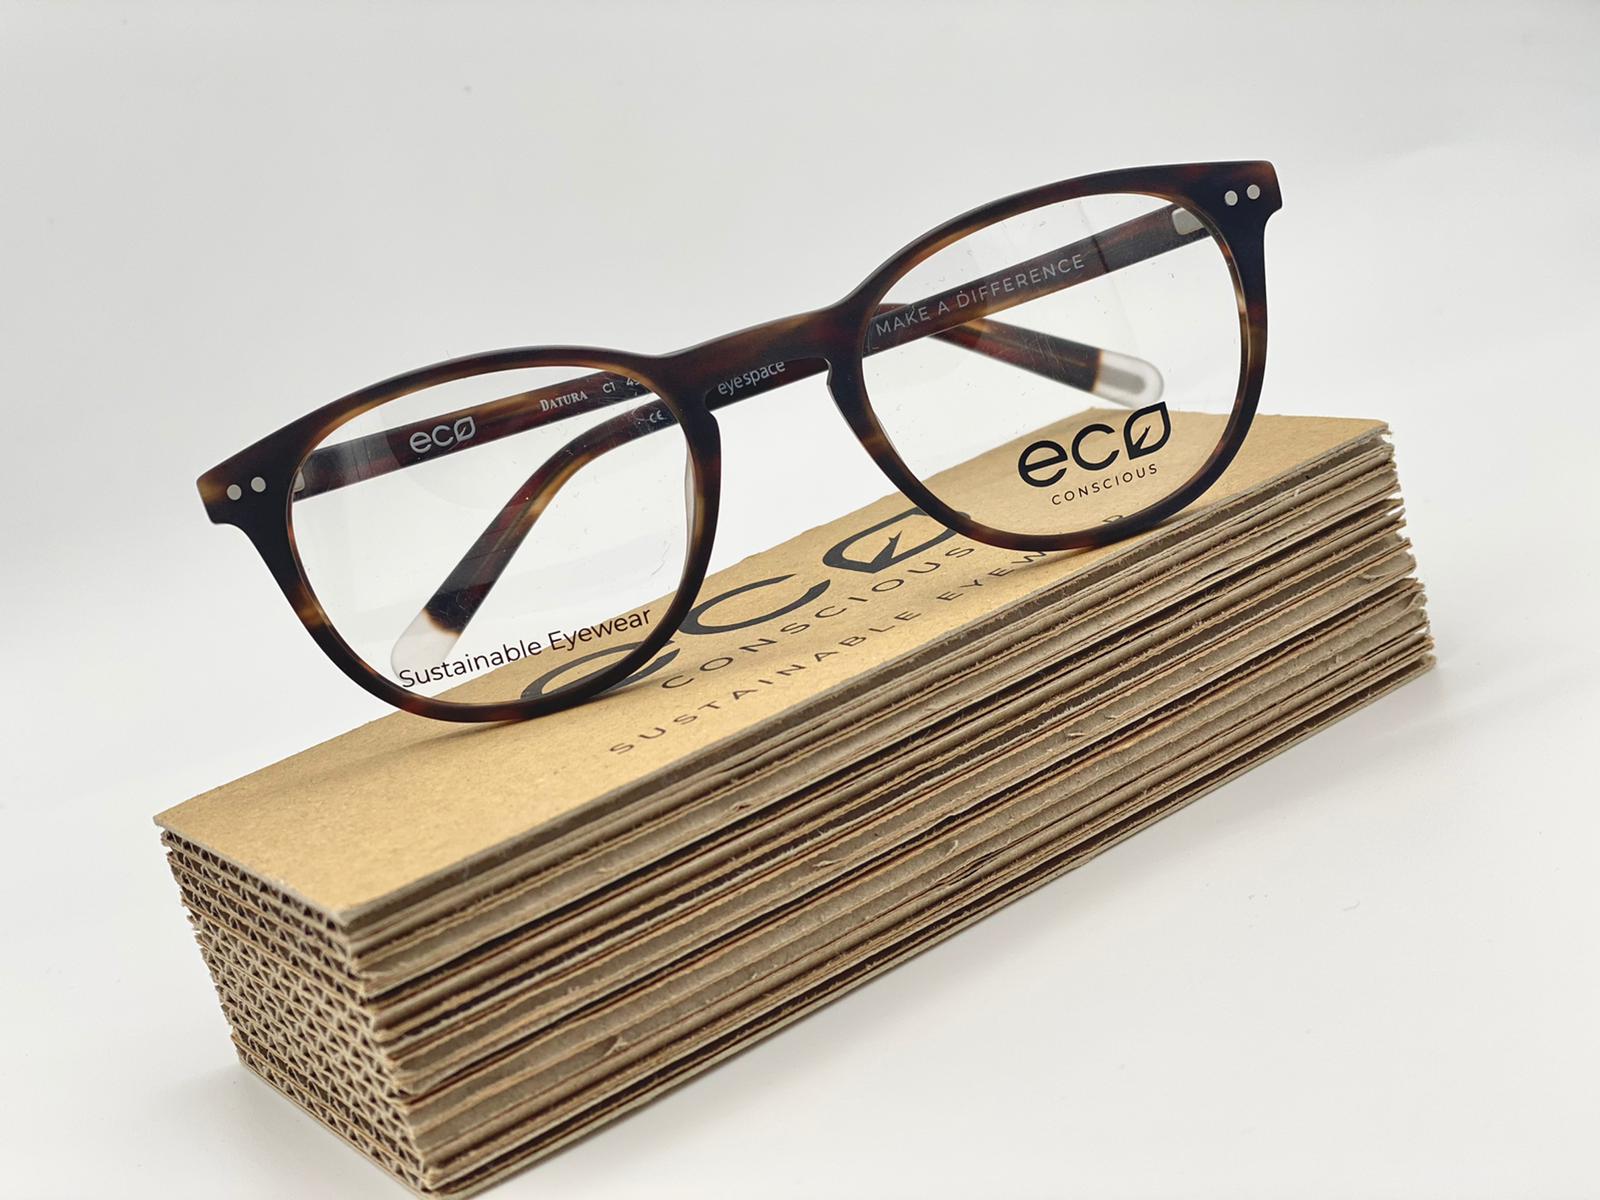 Eco Conscious eyewear are made form environmentally friendly materials and the manufacturing process is carbon neutral. This company plant a tree for every frame sold. 